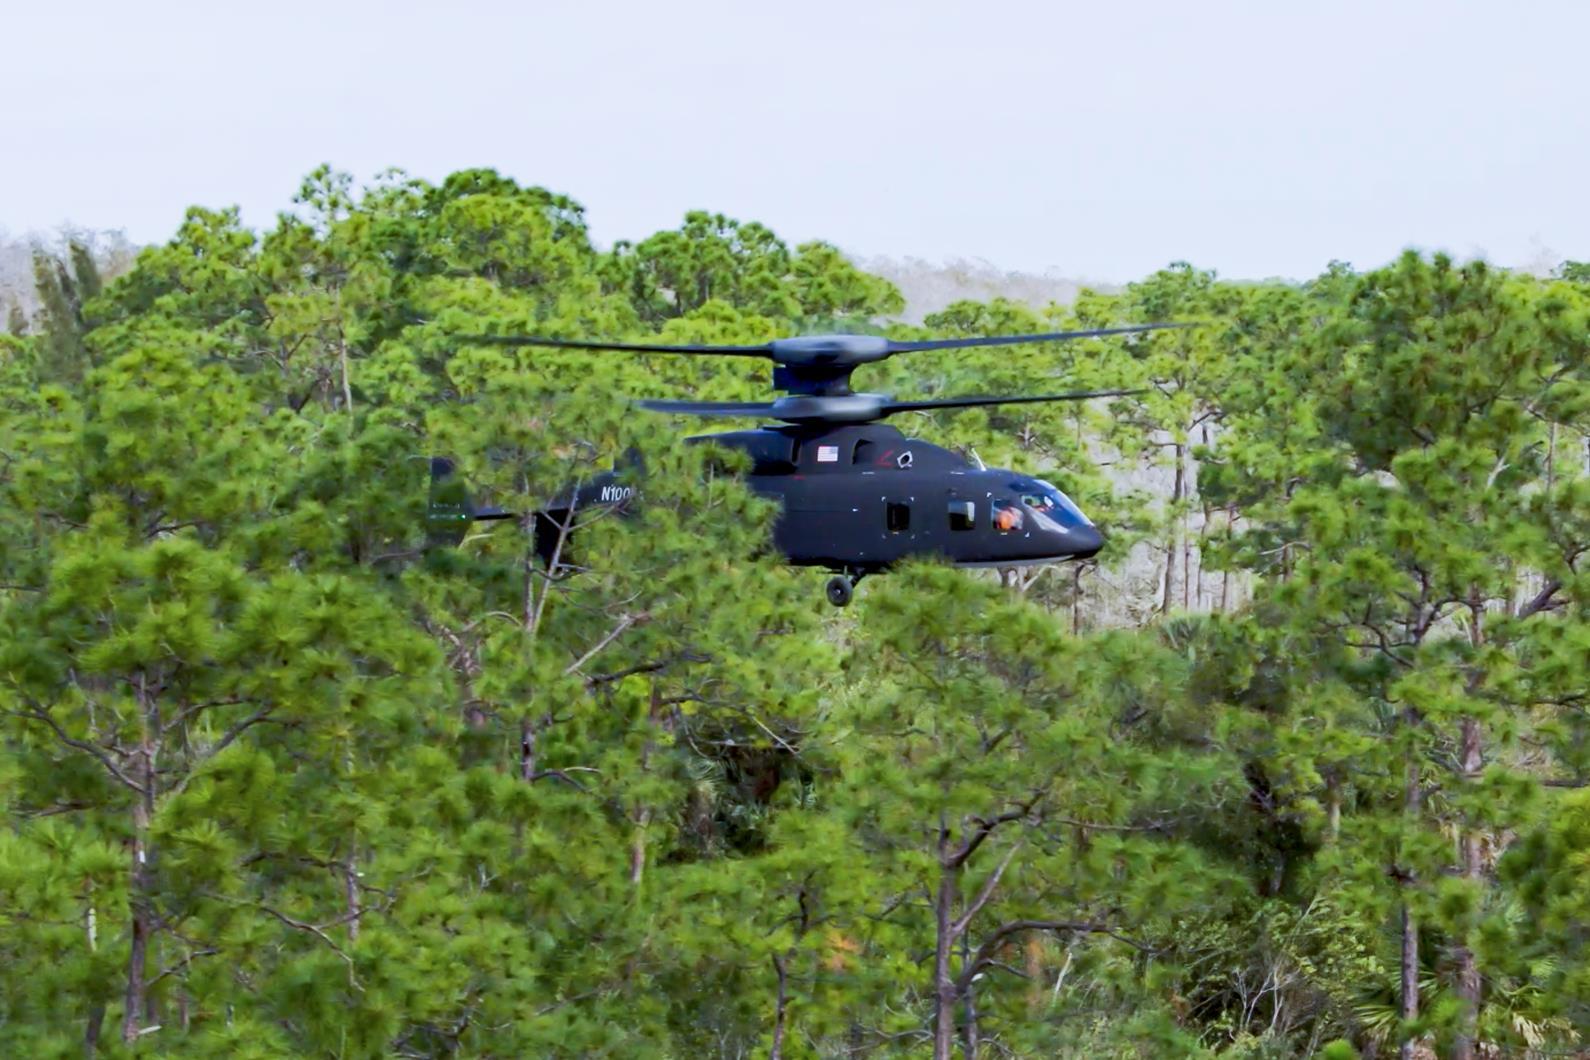 DEFIANT Technology Demonstrator recently executed a confined area landing among the trees in south Florida as part of the Lockheed Martin Sikorsky-Boeing team's effort to validate aircraft design and relevance to the Army's Future Long Range Assault Aircraft mission profile. (Lockheed Martin Sikorsky-Boeing photo)